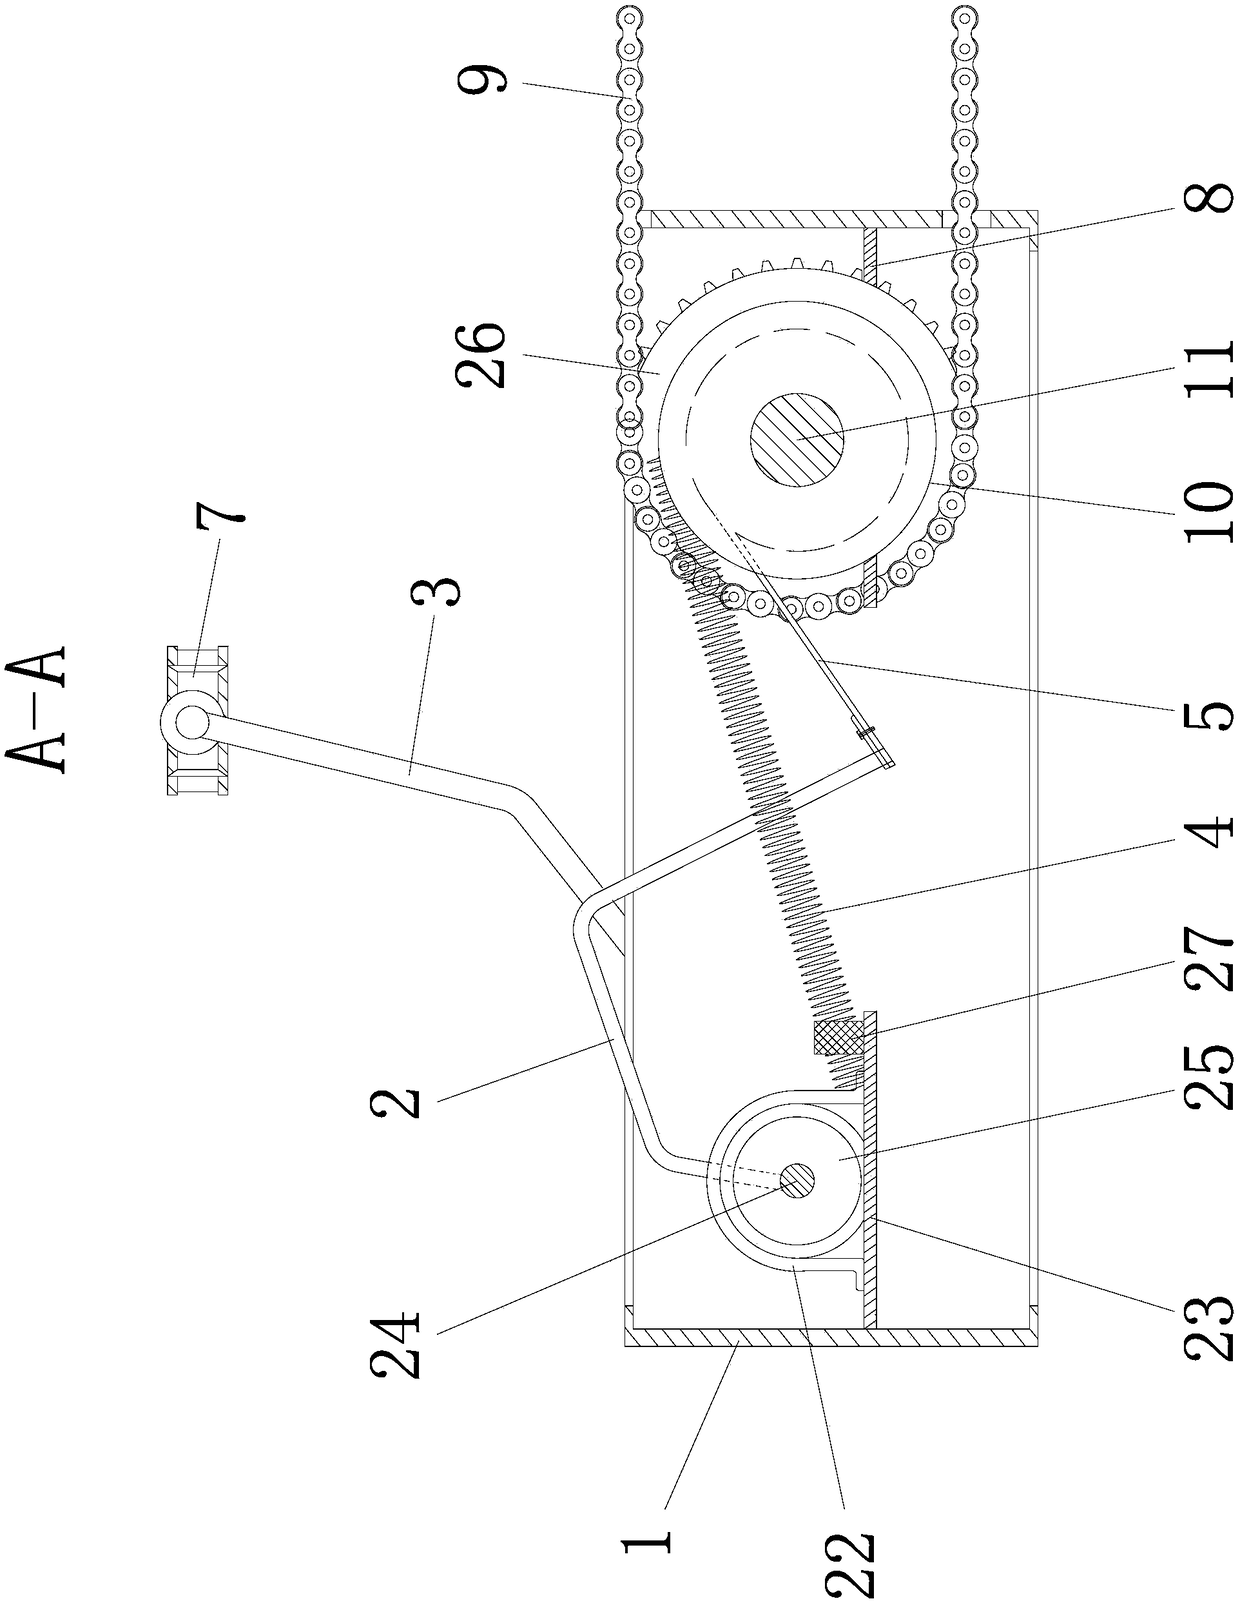 Double-flight linkage longitudinal riding lever-type driving device for bicycle